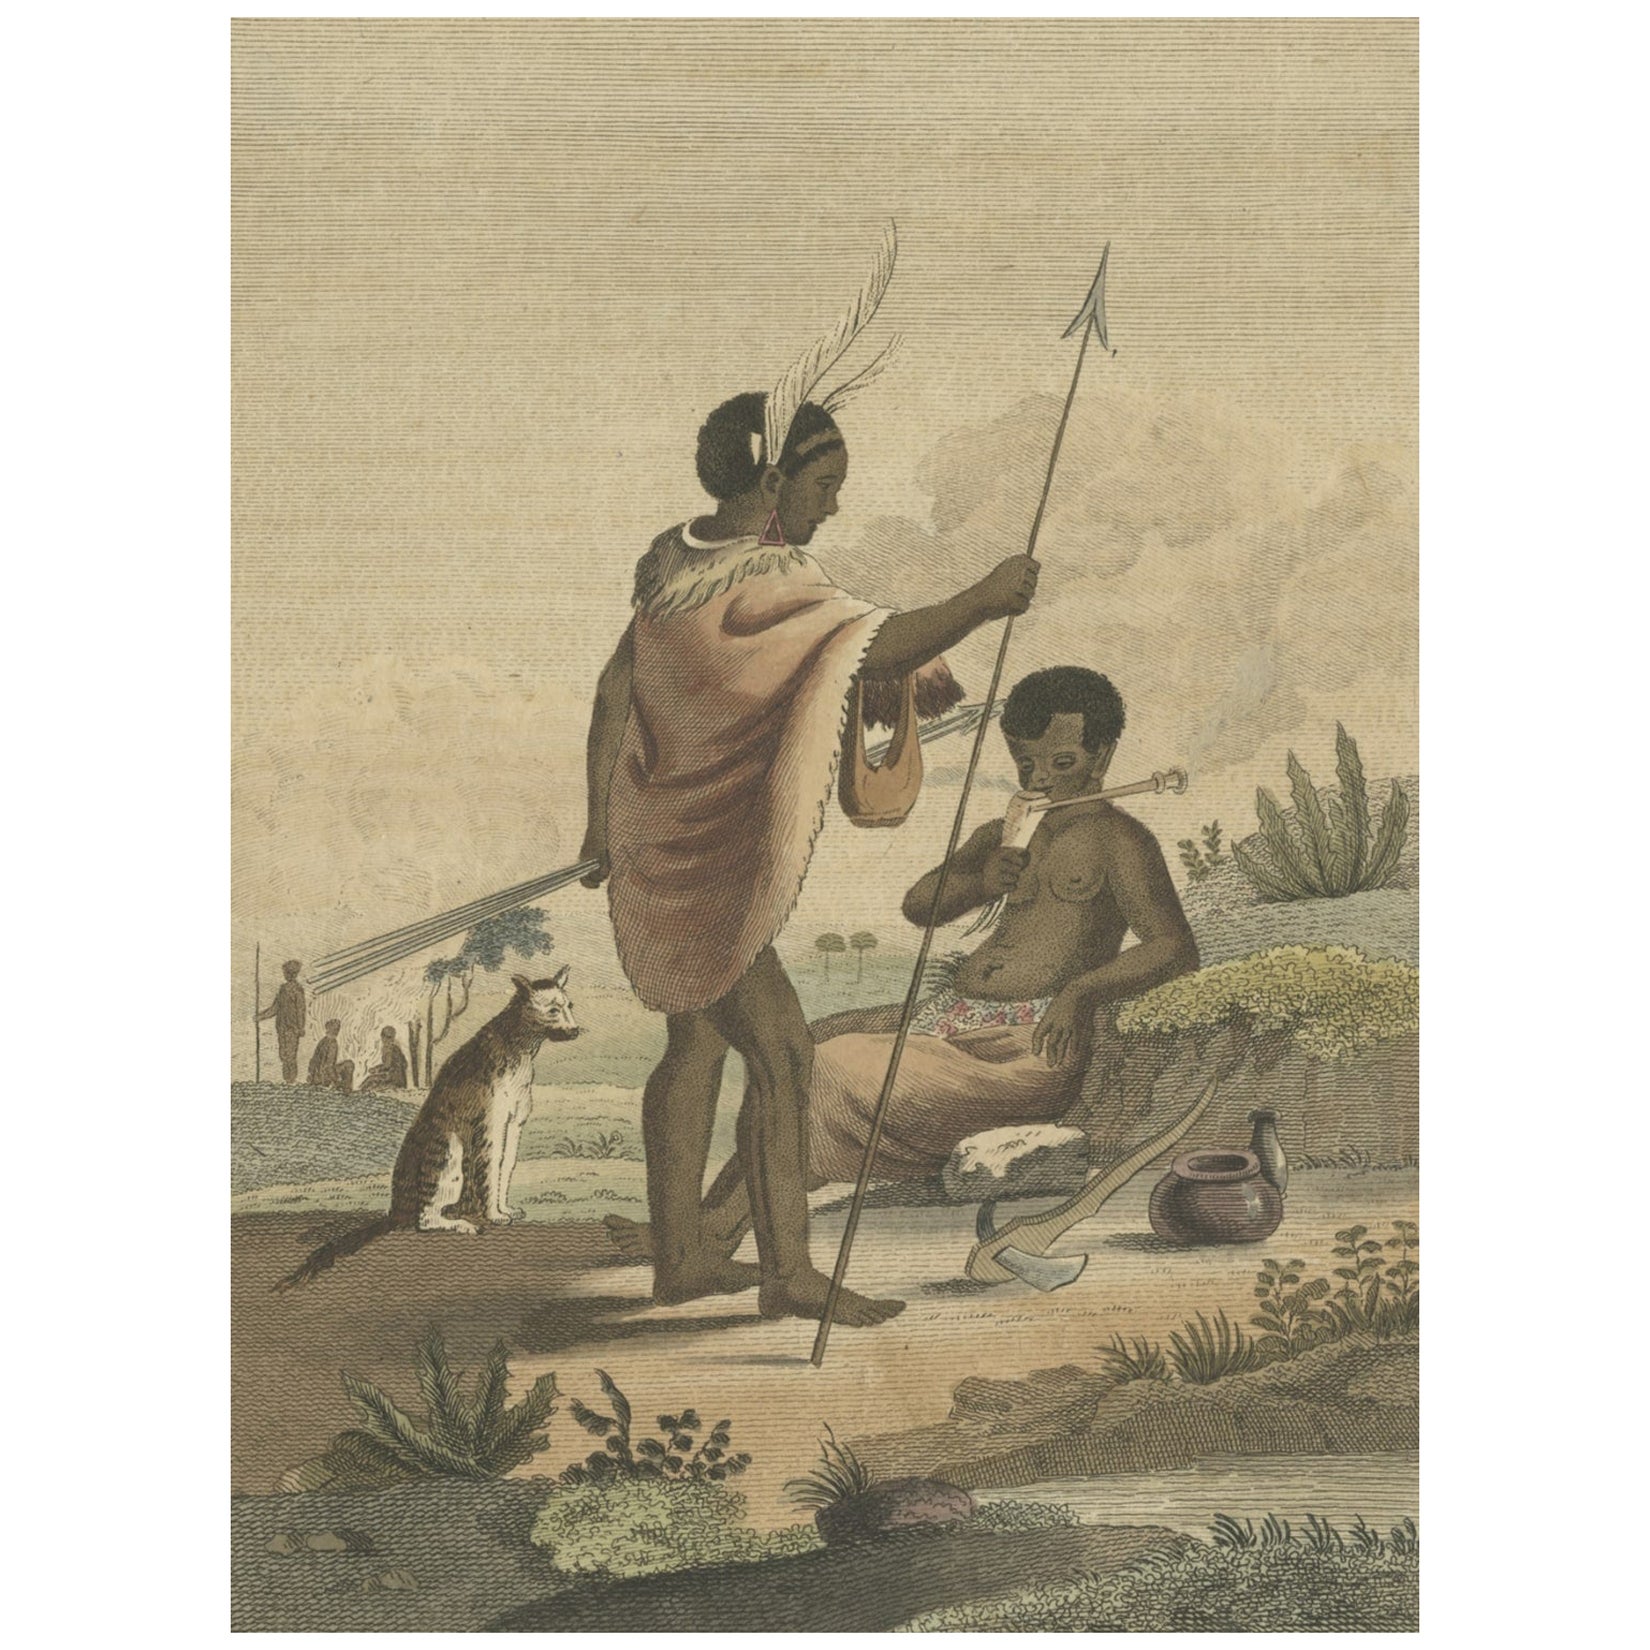 Antique Print of Natives from Africa, 1807